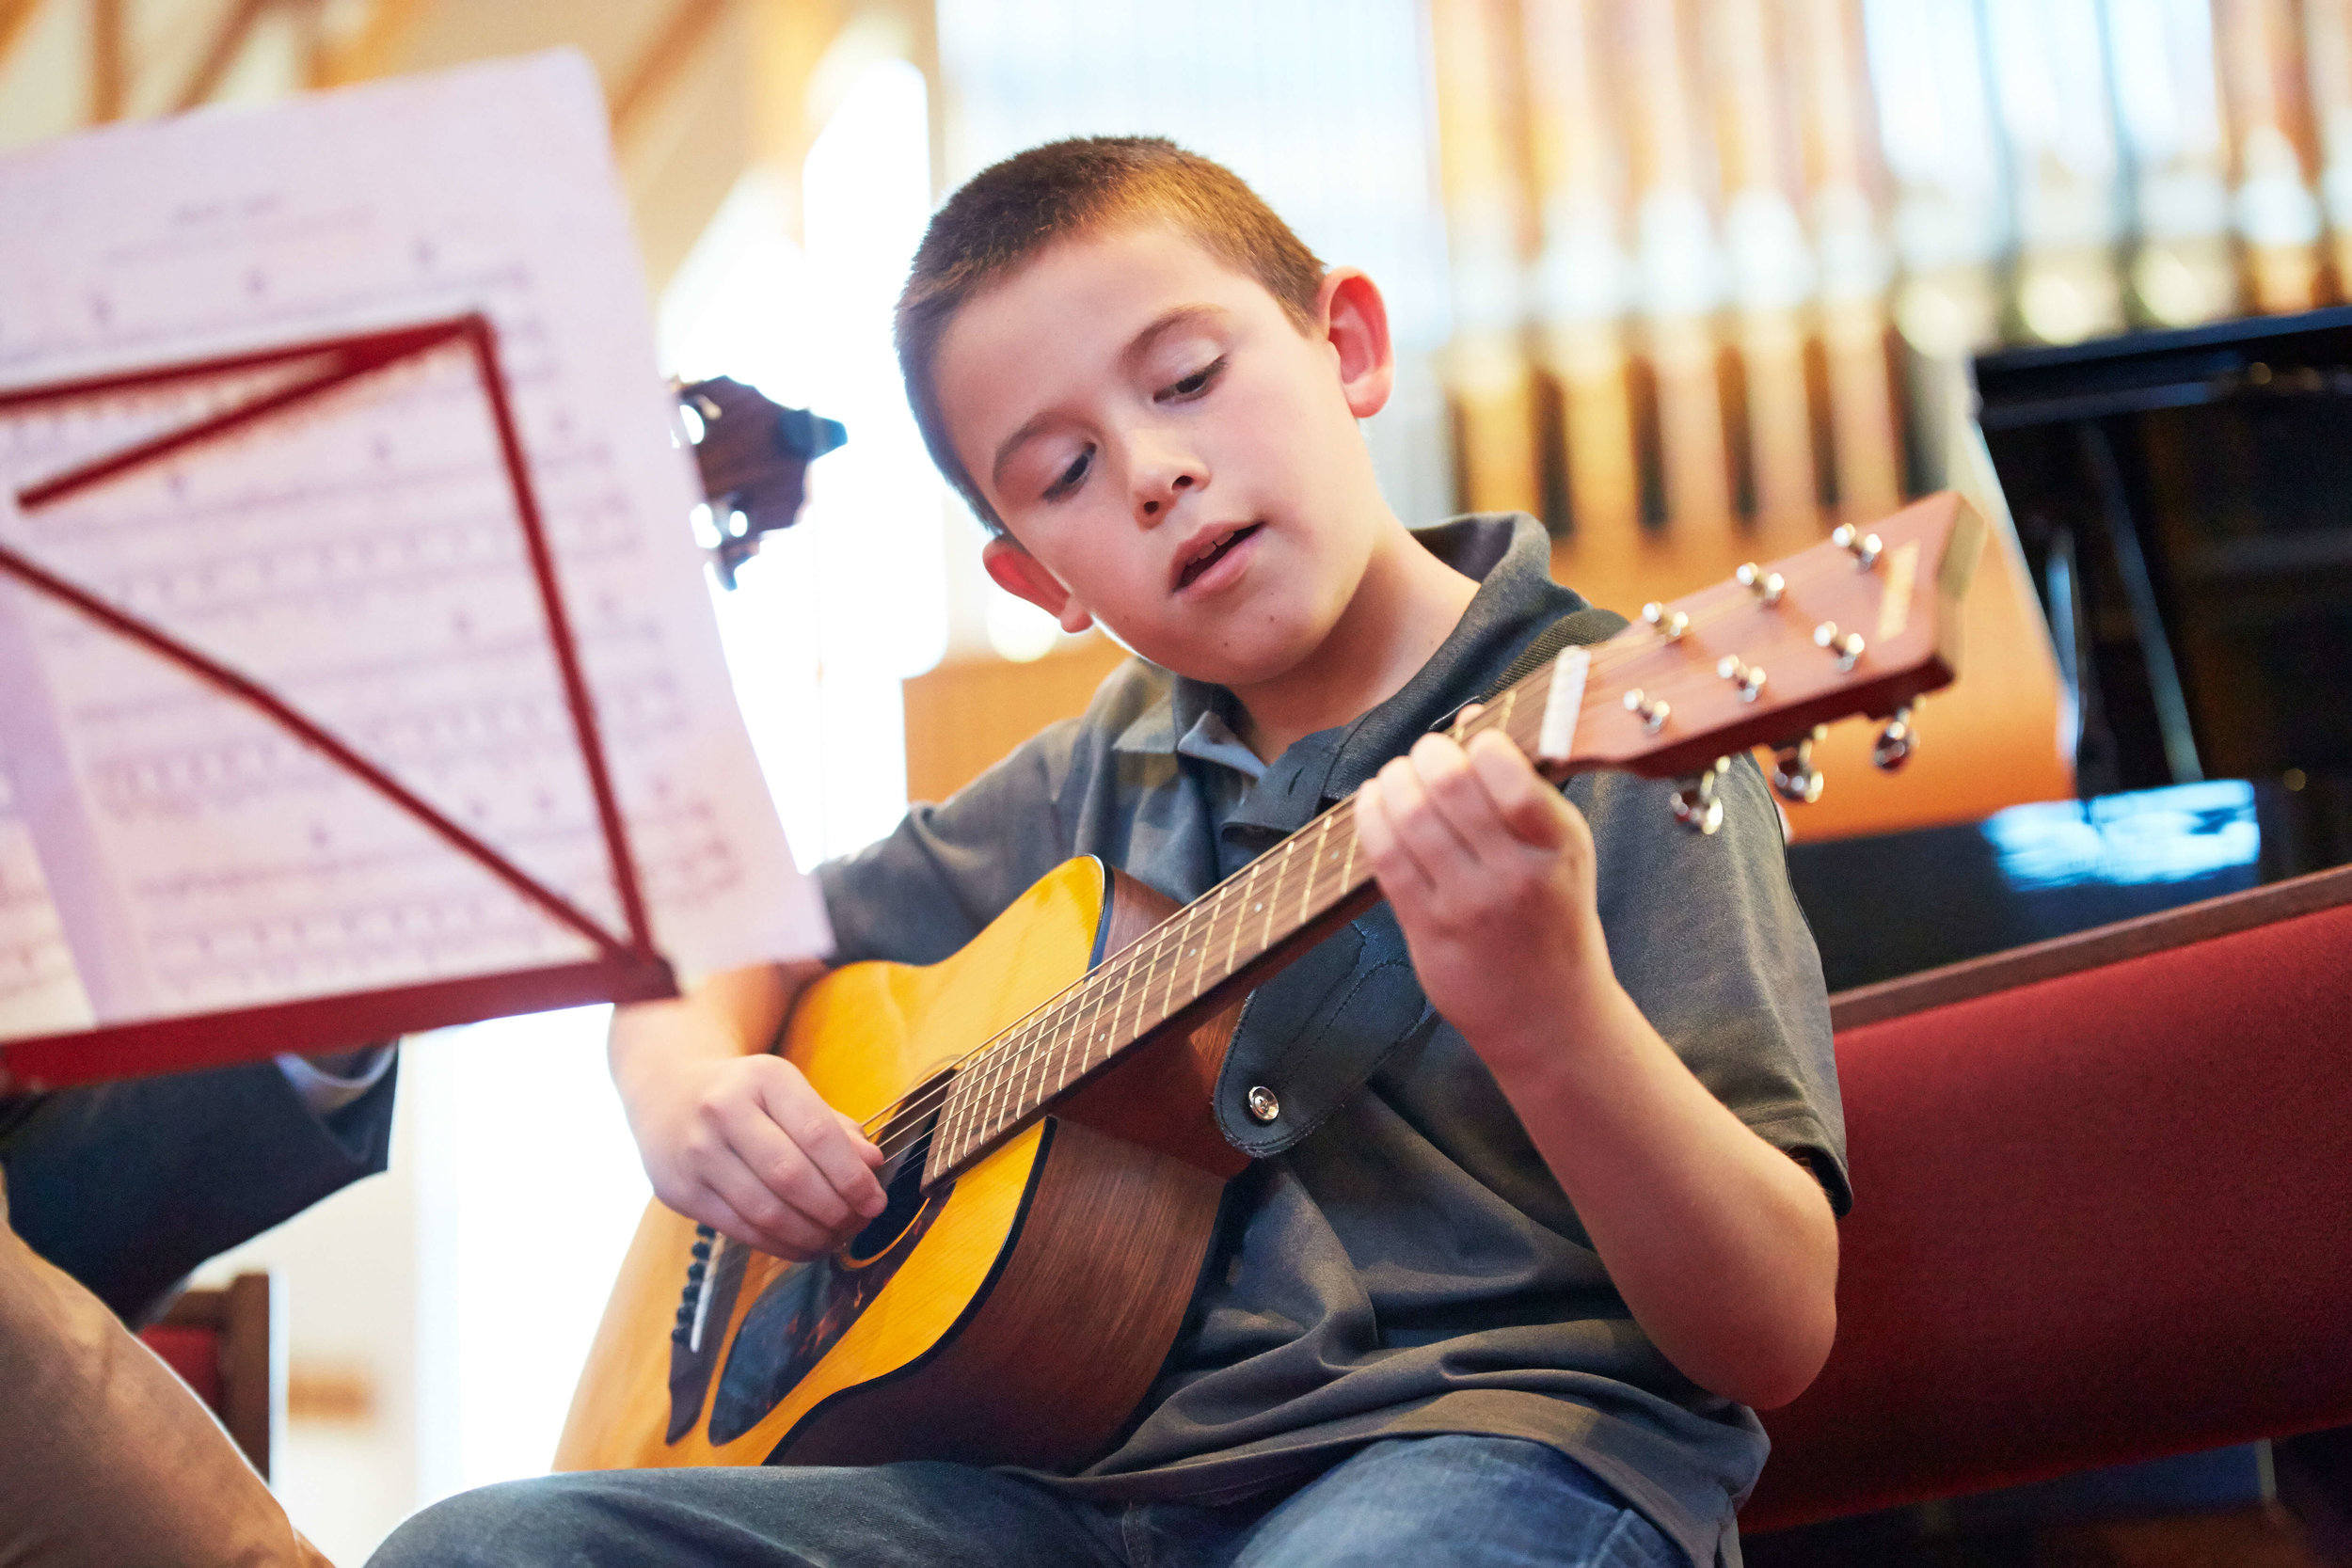   GUITAR LESSONS IN CINCINNATI, ANDERSON, &amp; MASON   for beginner, intermediate, and advanced students of all ages  CALL  513-560-9175  TODAY TO SCHEDULE YOUR FIRST LESSON   Request Info  